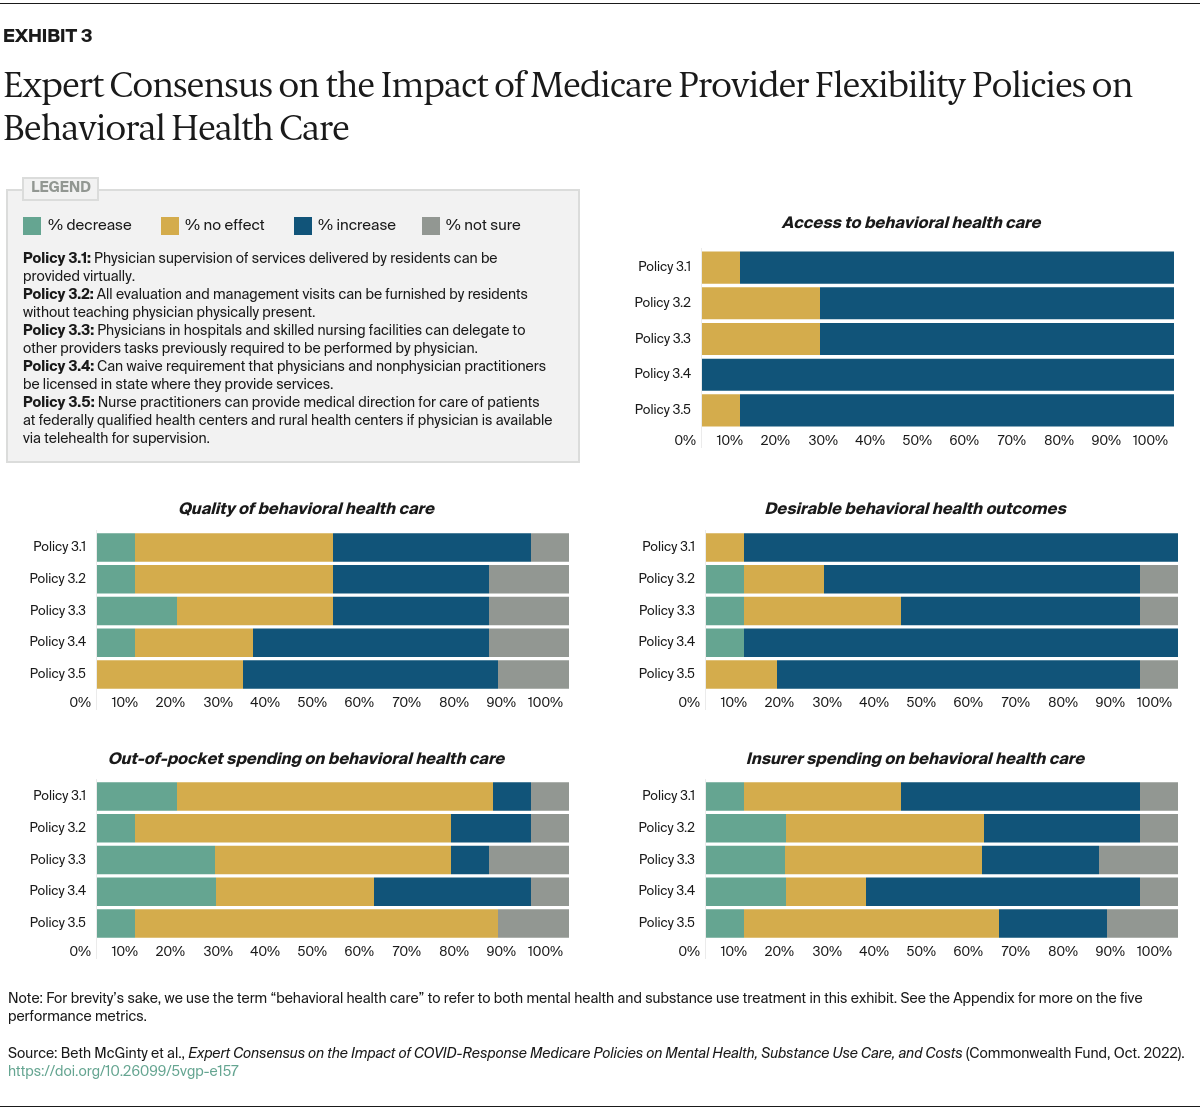 McGinty_expert_consensus_impact_covid_medicare_mental_health_substance_use_Exhibit_03